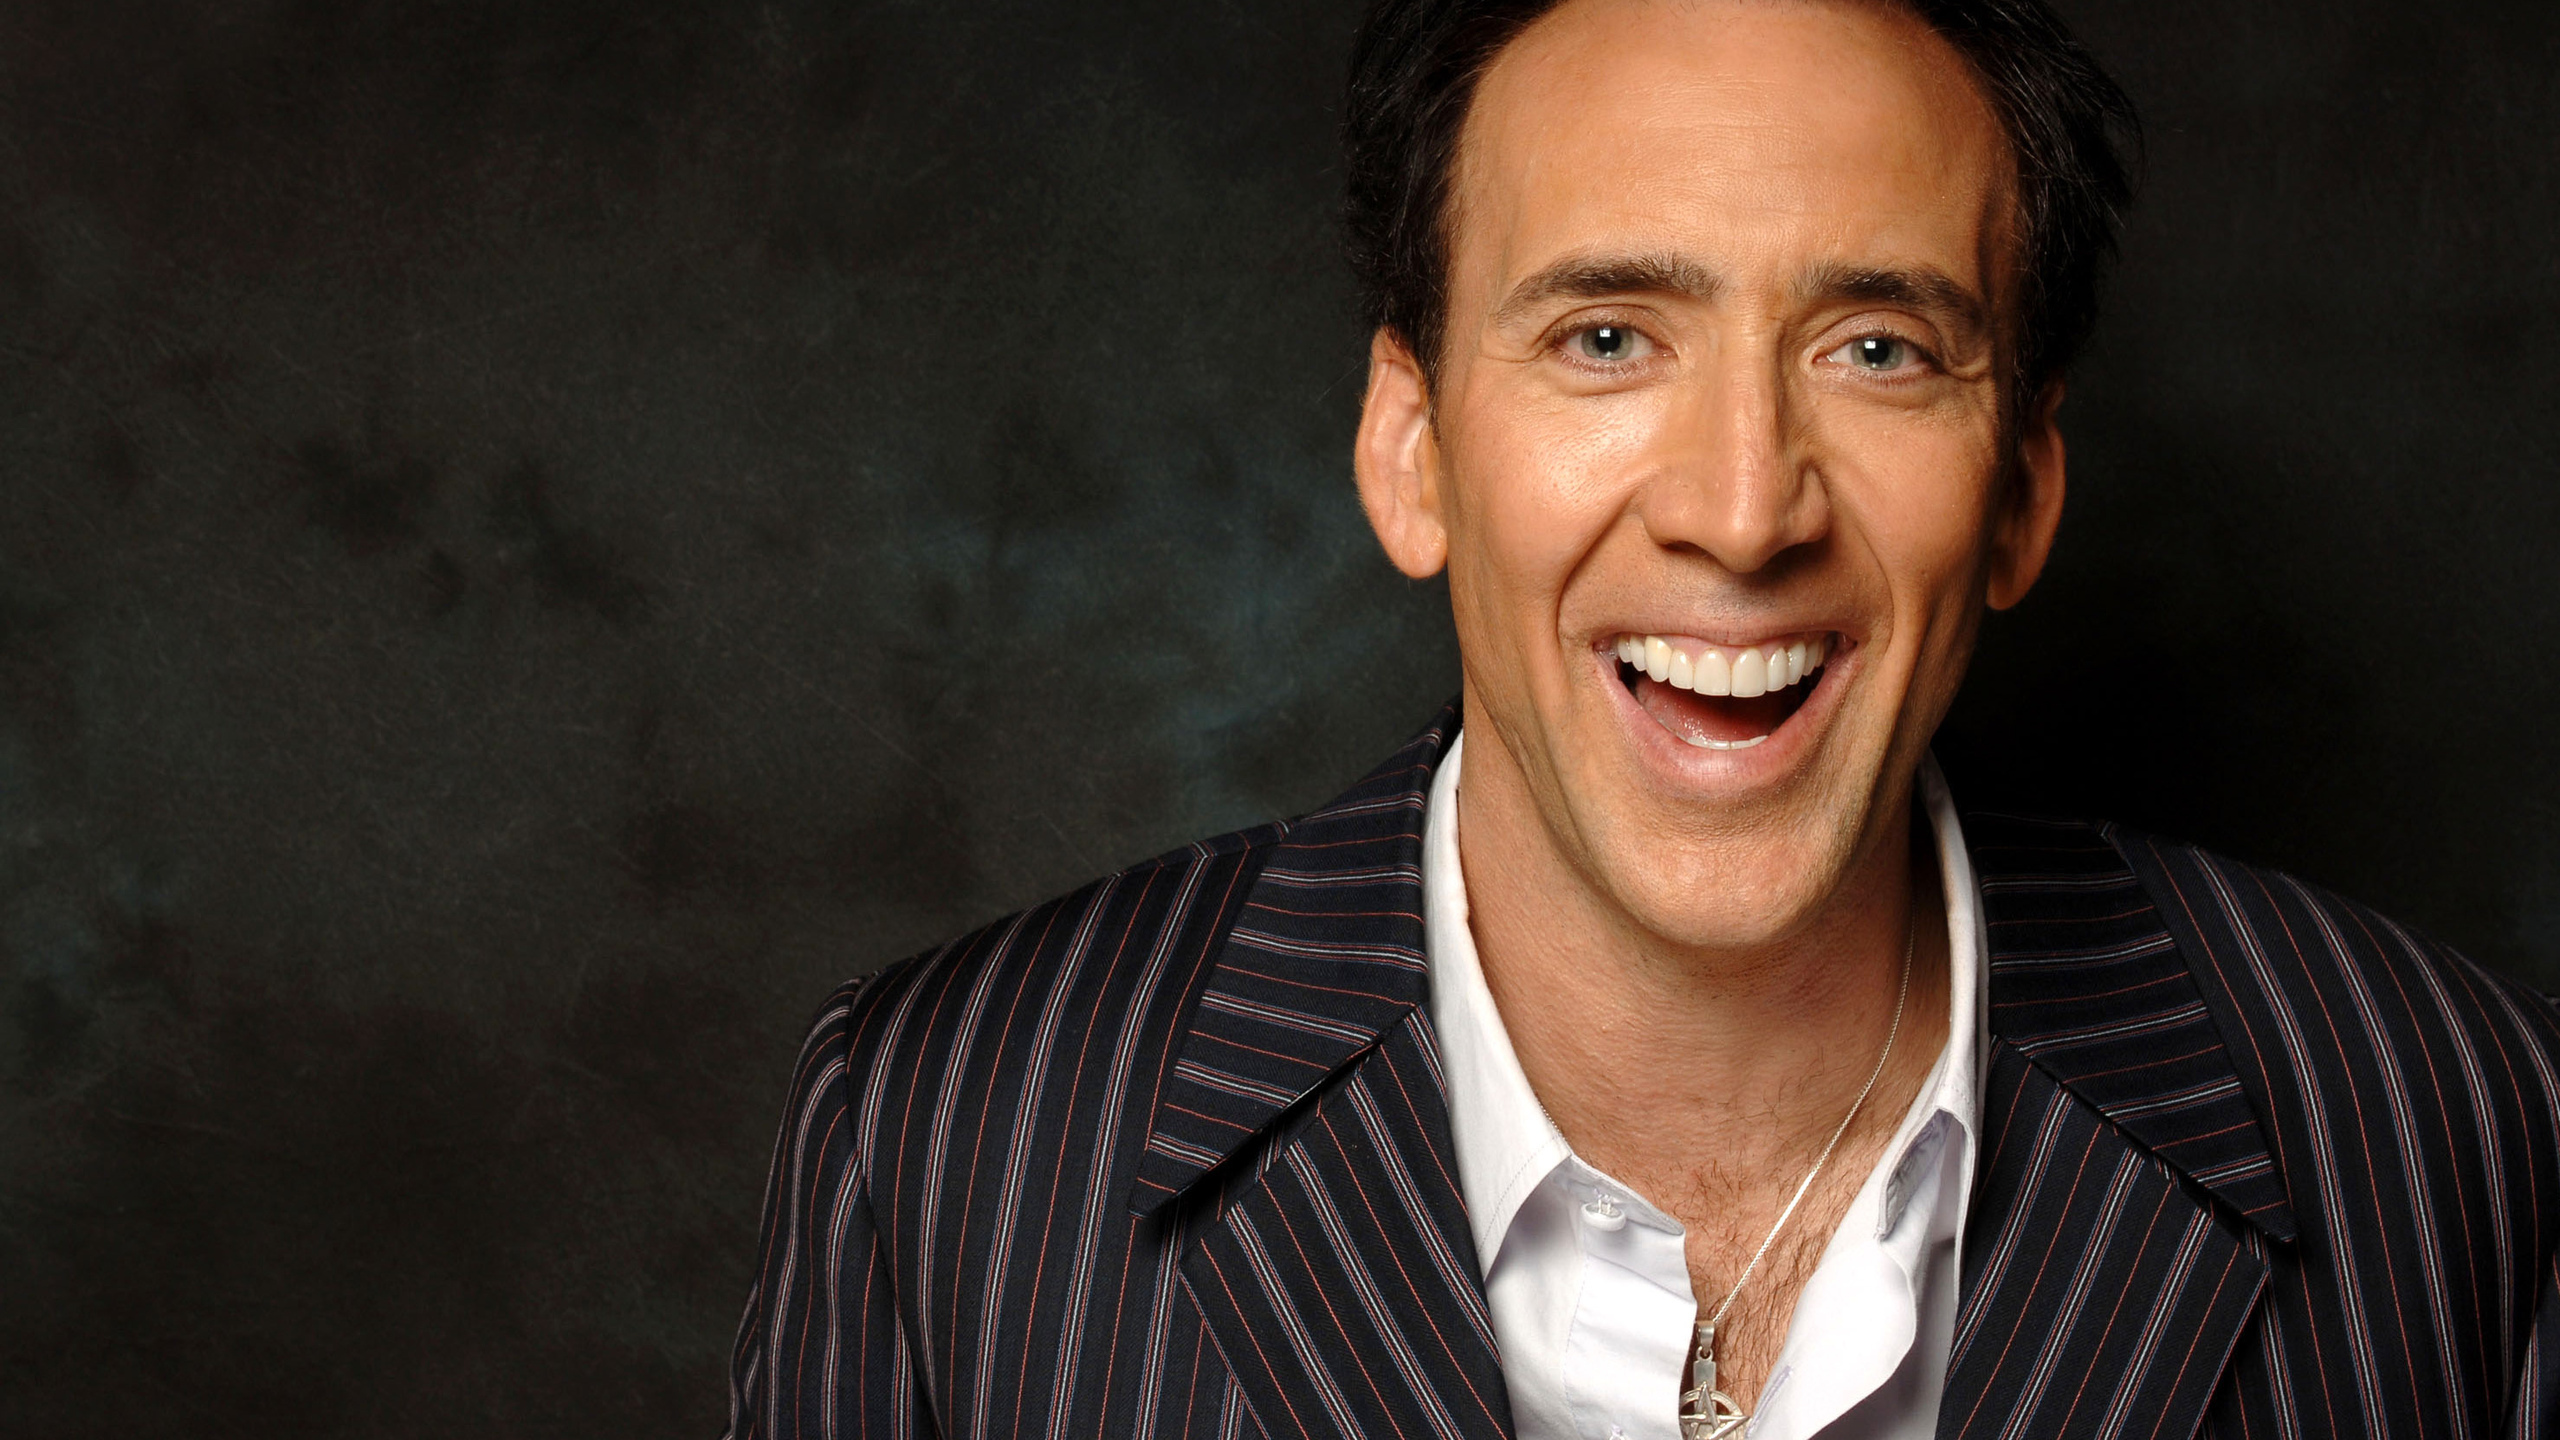 Nicolas Cage Wallpaper Image Photos Pictures Background